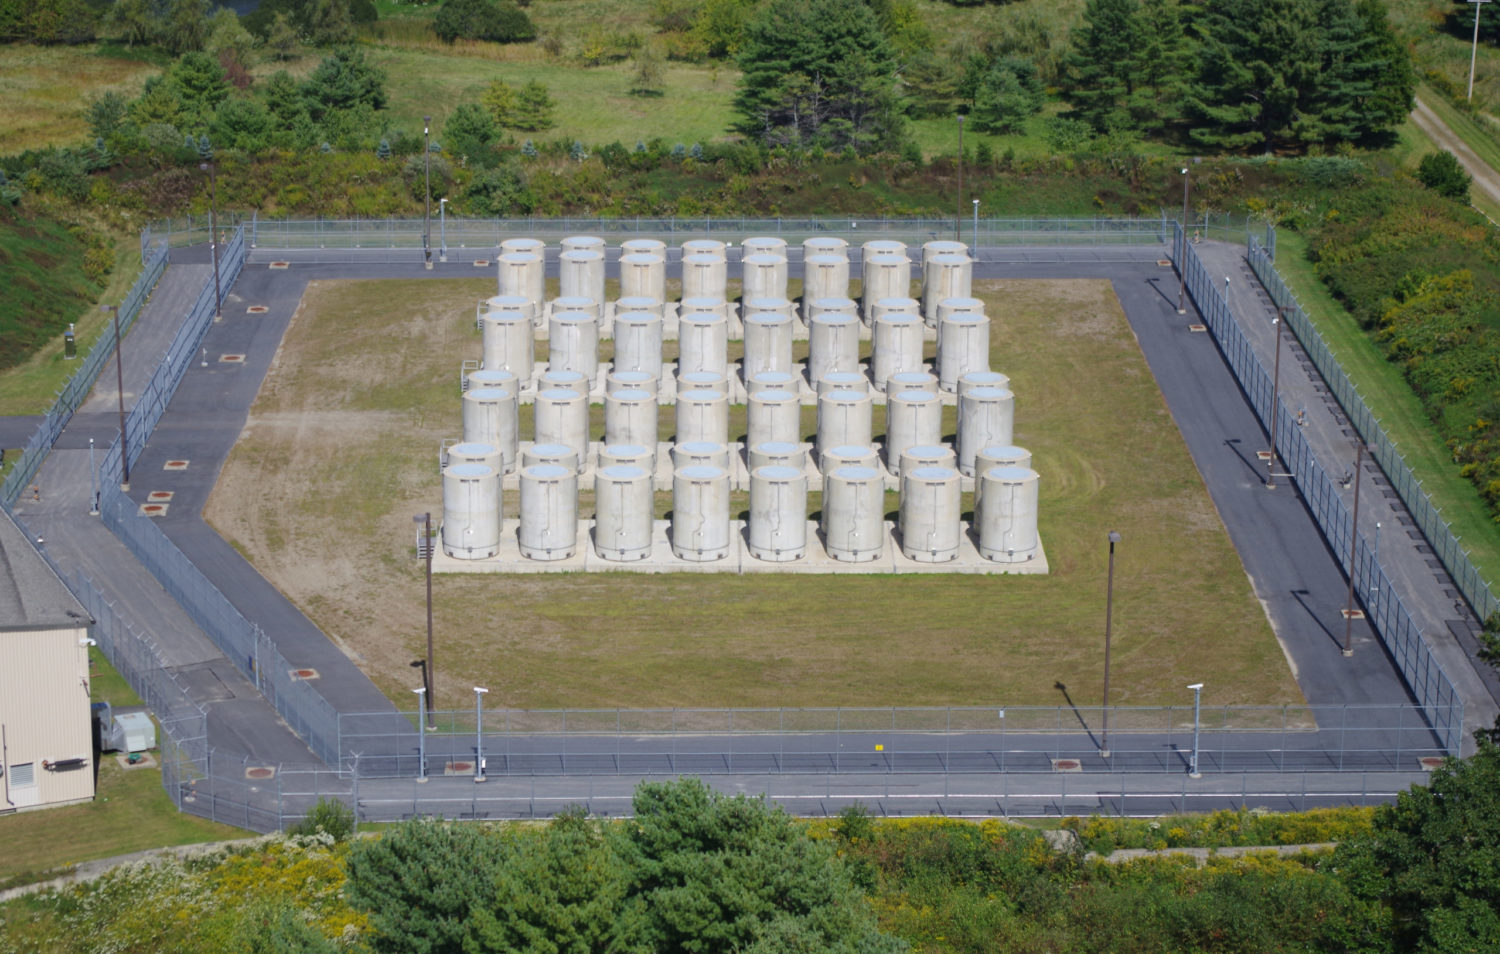 Dry casks containing nuclear waste